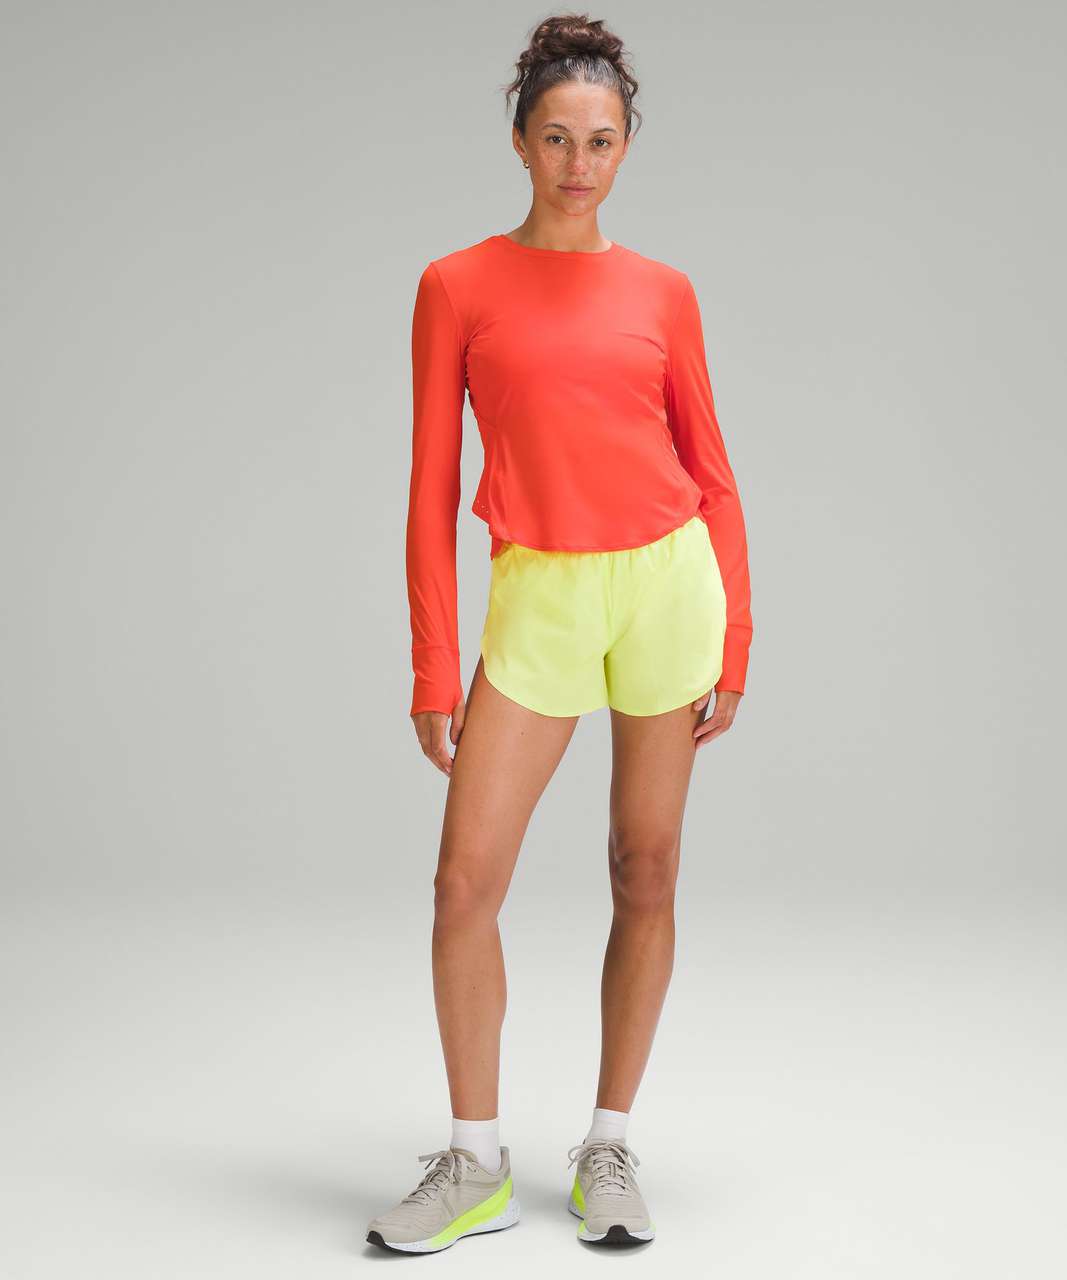 7 reasons to buy/not to buy the Lululemon's Fast and Free Reflective  High-Rise Classic-Fit Short 3”